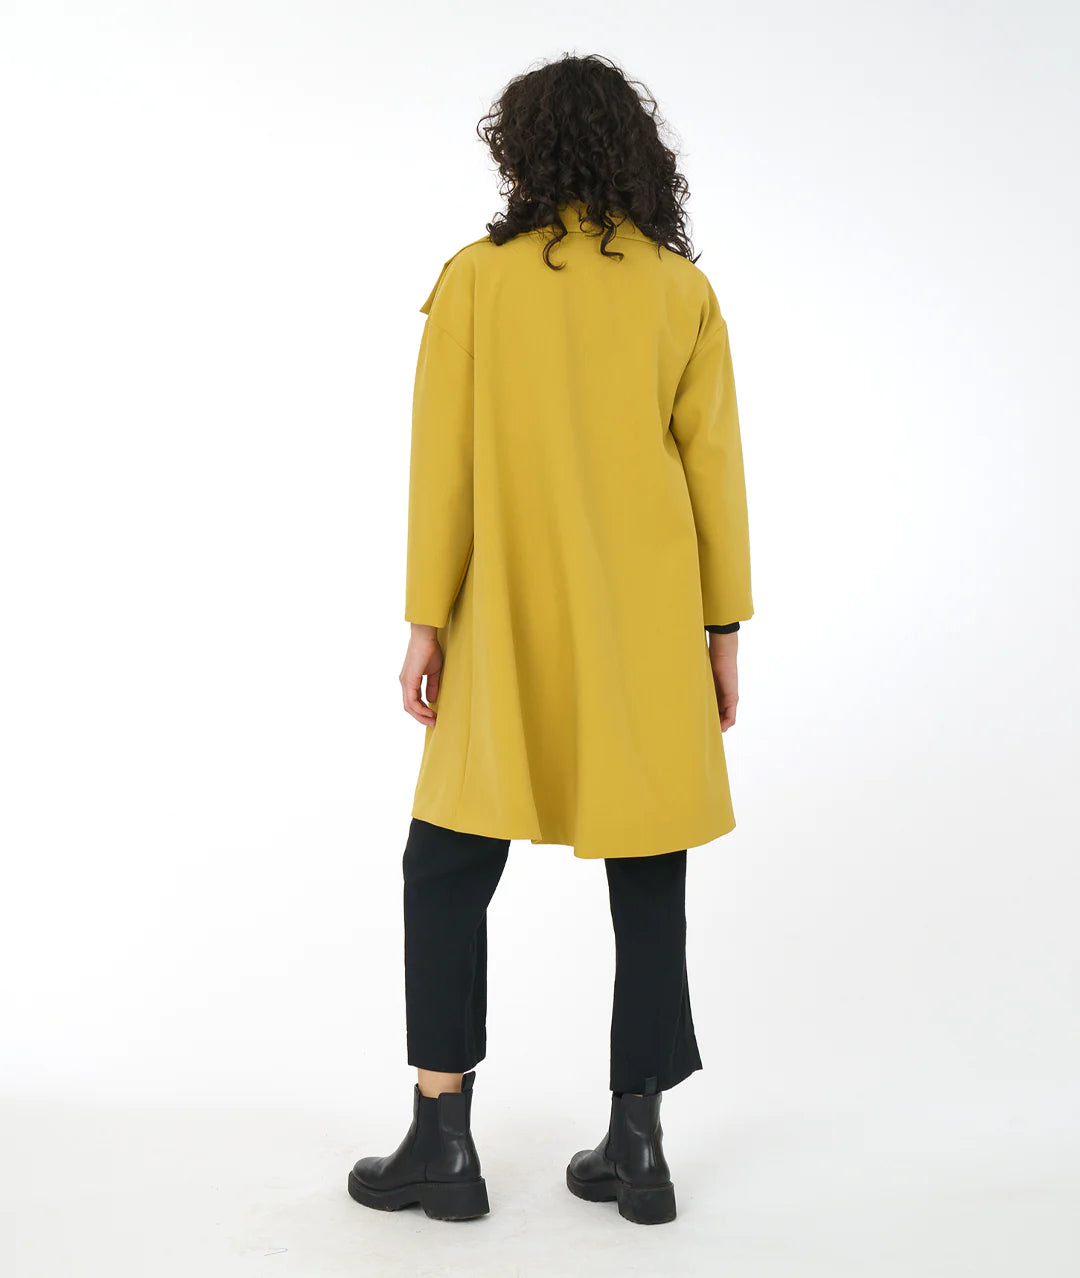 back of model in black pants and boots with a gold asymmetrical jacket with a large collar